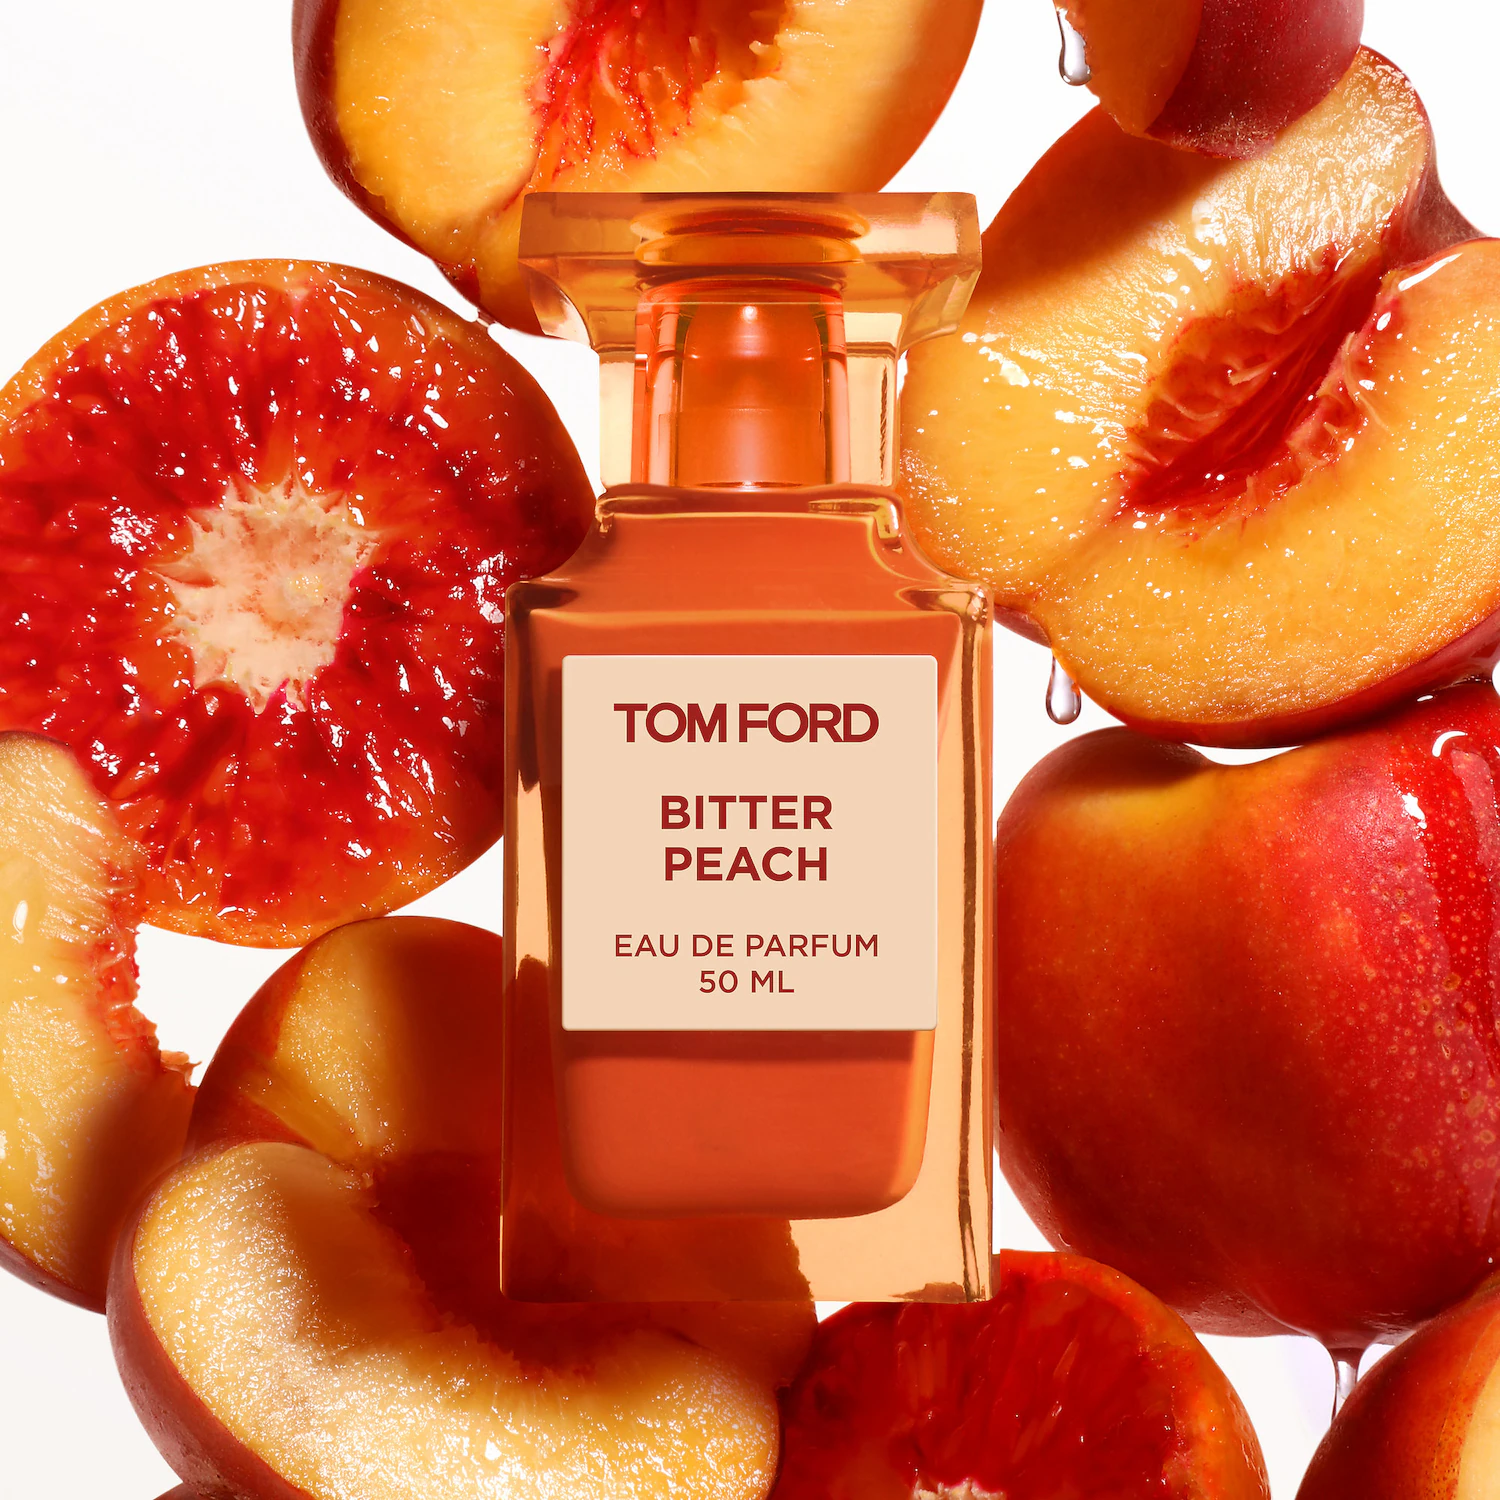 Tom Ford Bitter Peach Is A Lavishly Delicious Scent